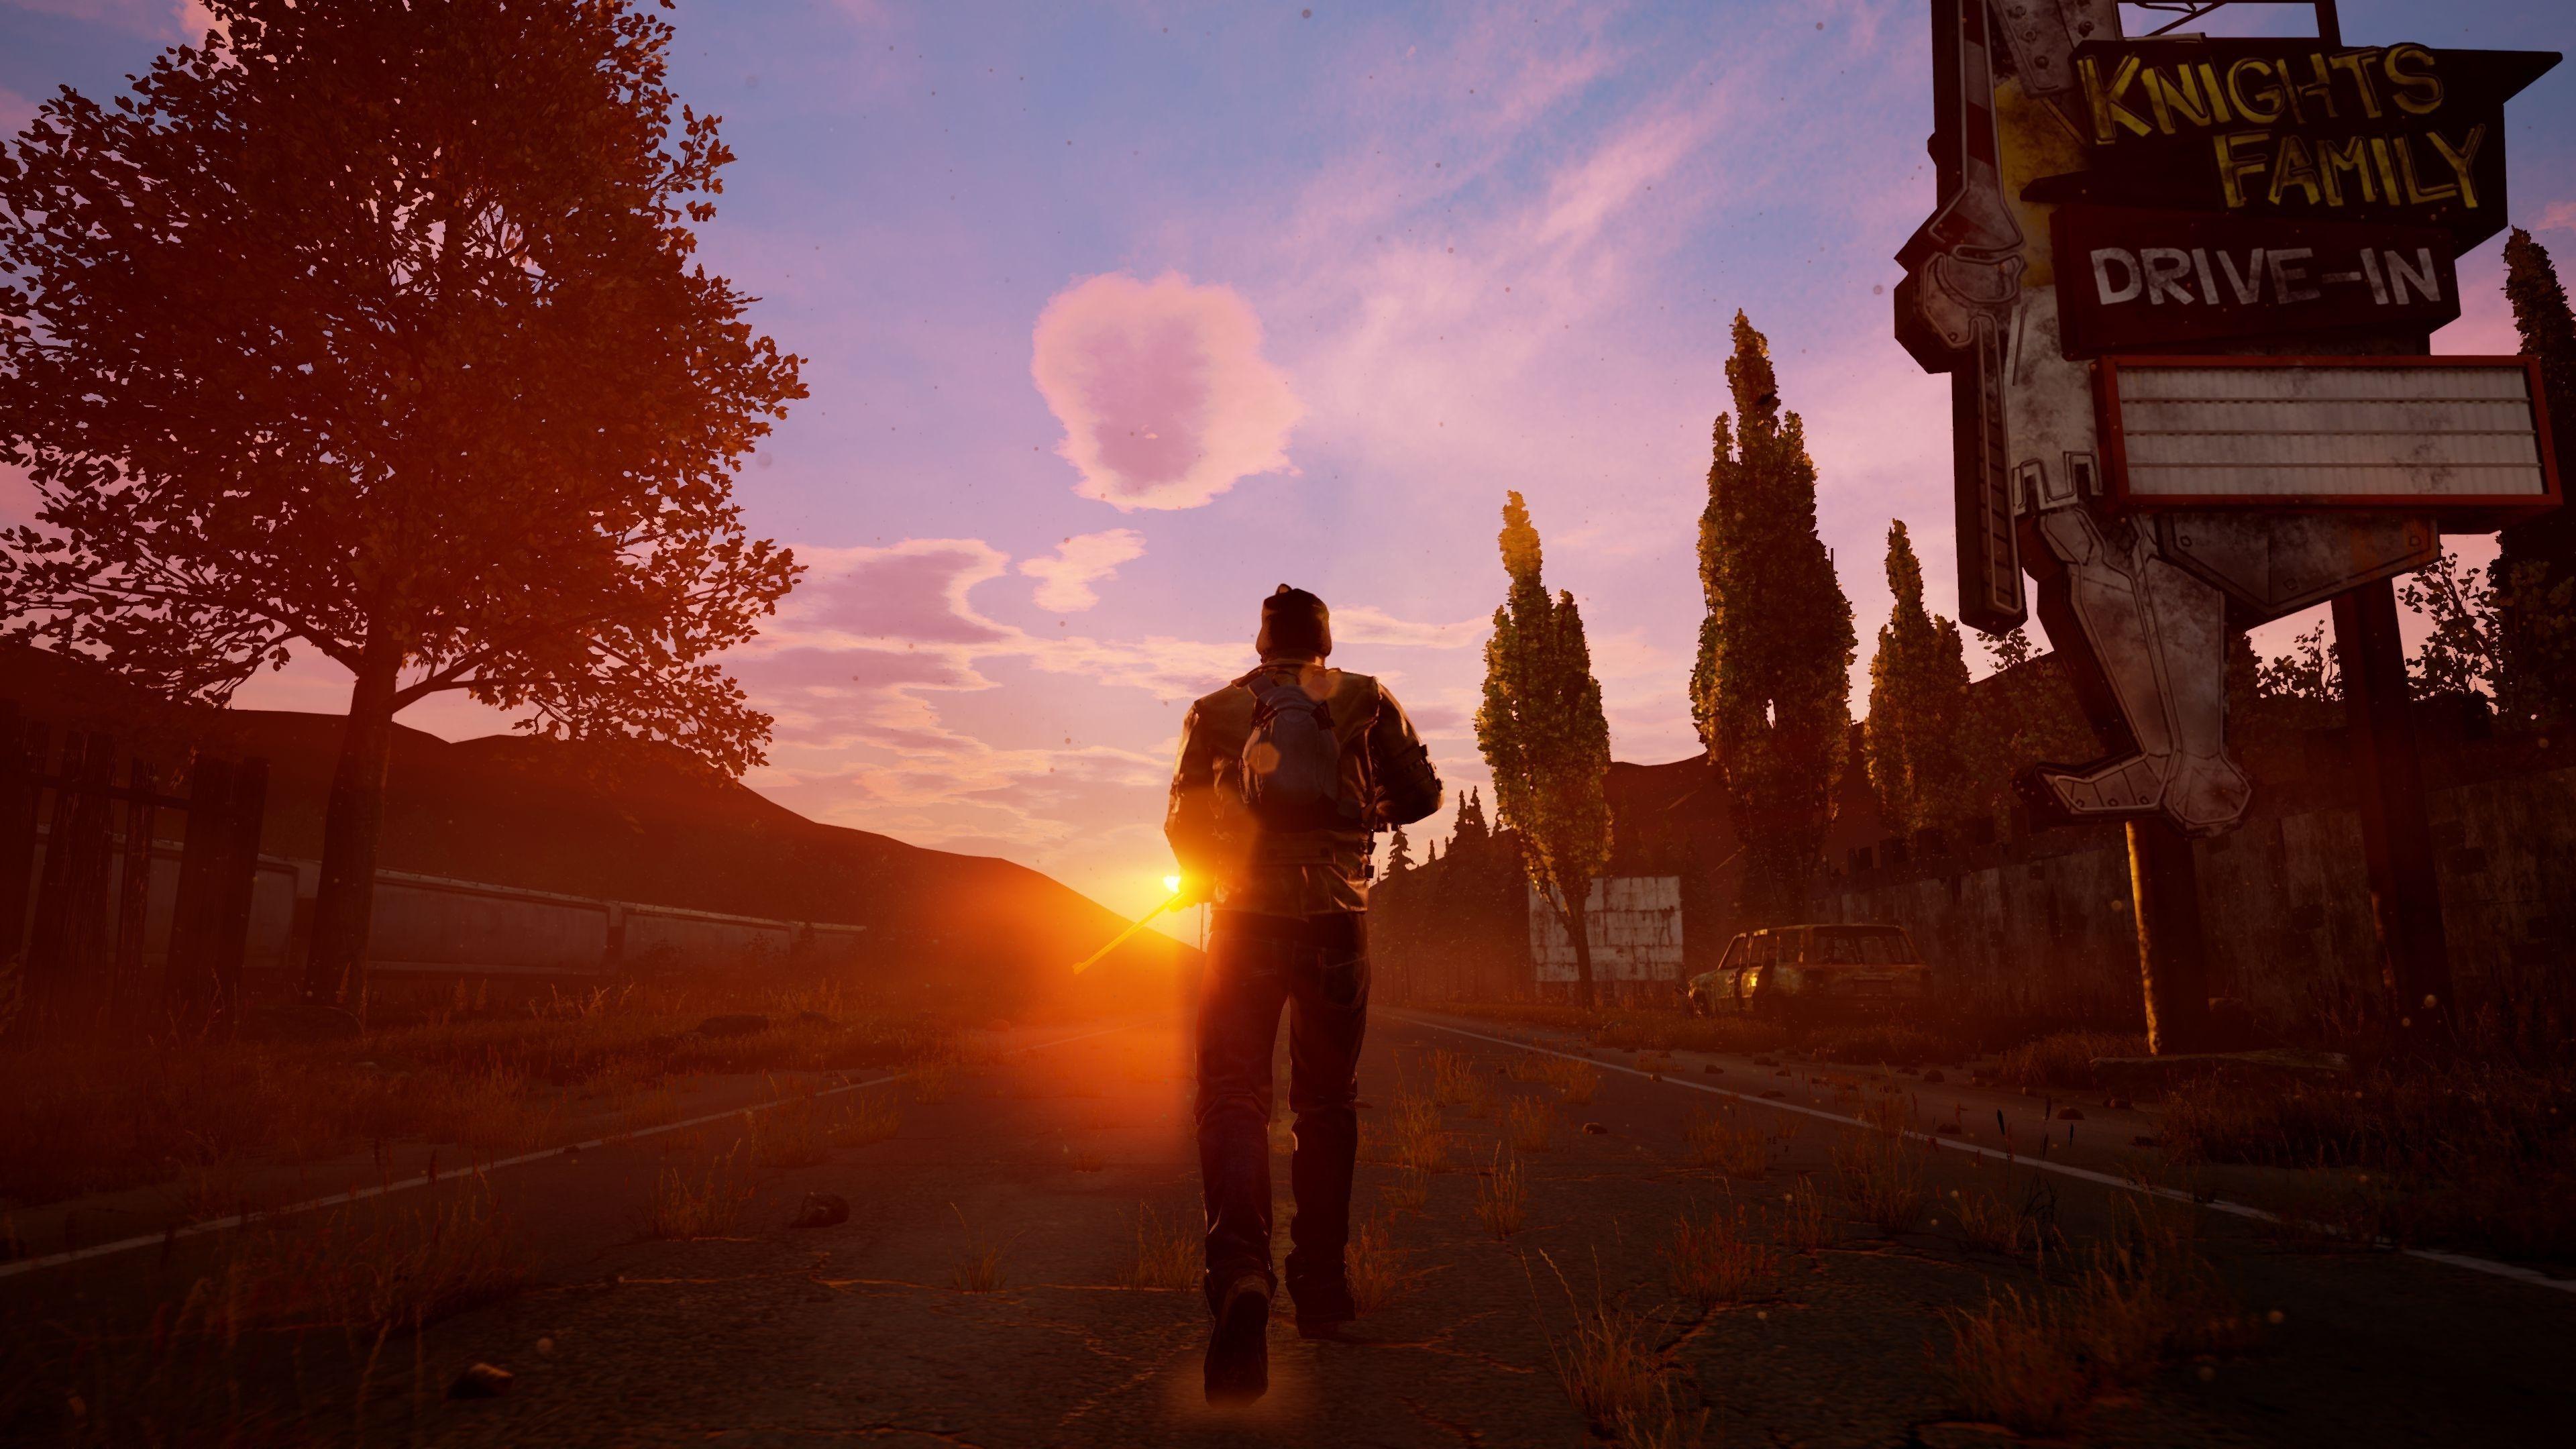 3840x2160 state of decay 4k ultra hd desktop wallpapers